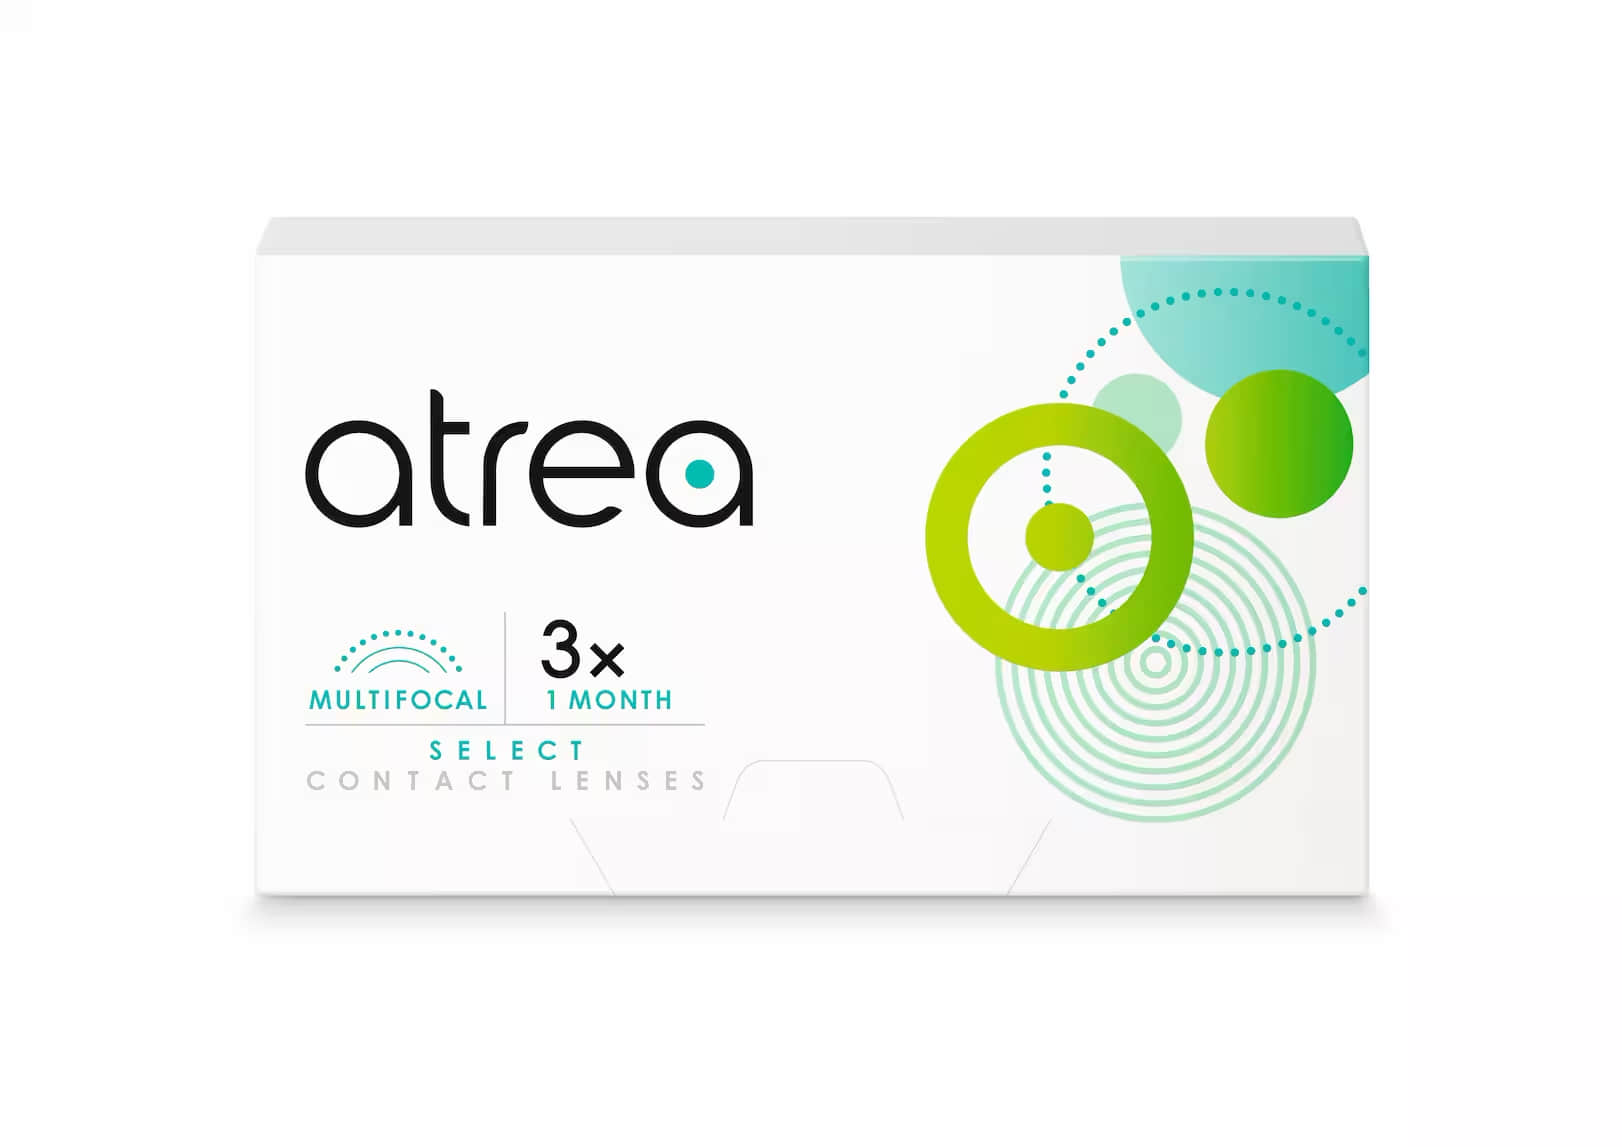 Atrea Select 1 Month Multifocal N 3 pack, 30 days, Contactlenzen, 